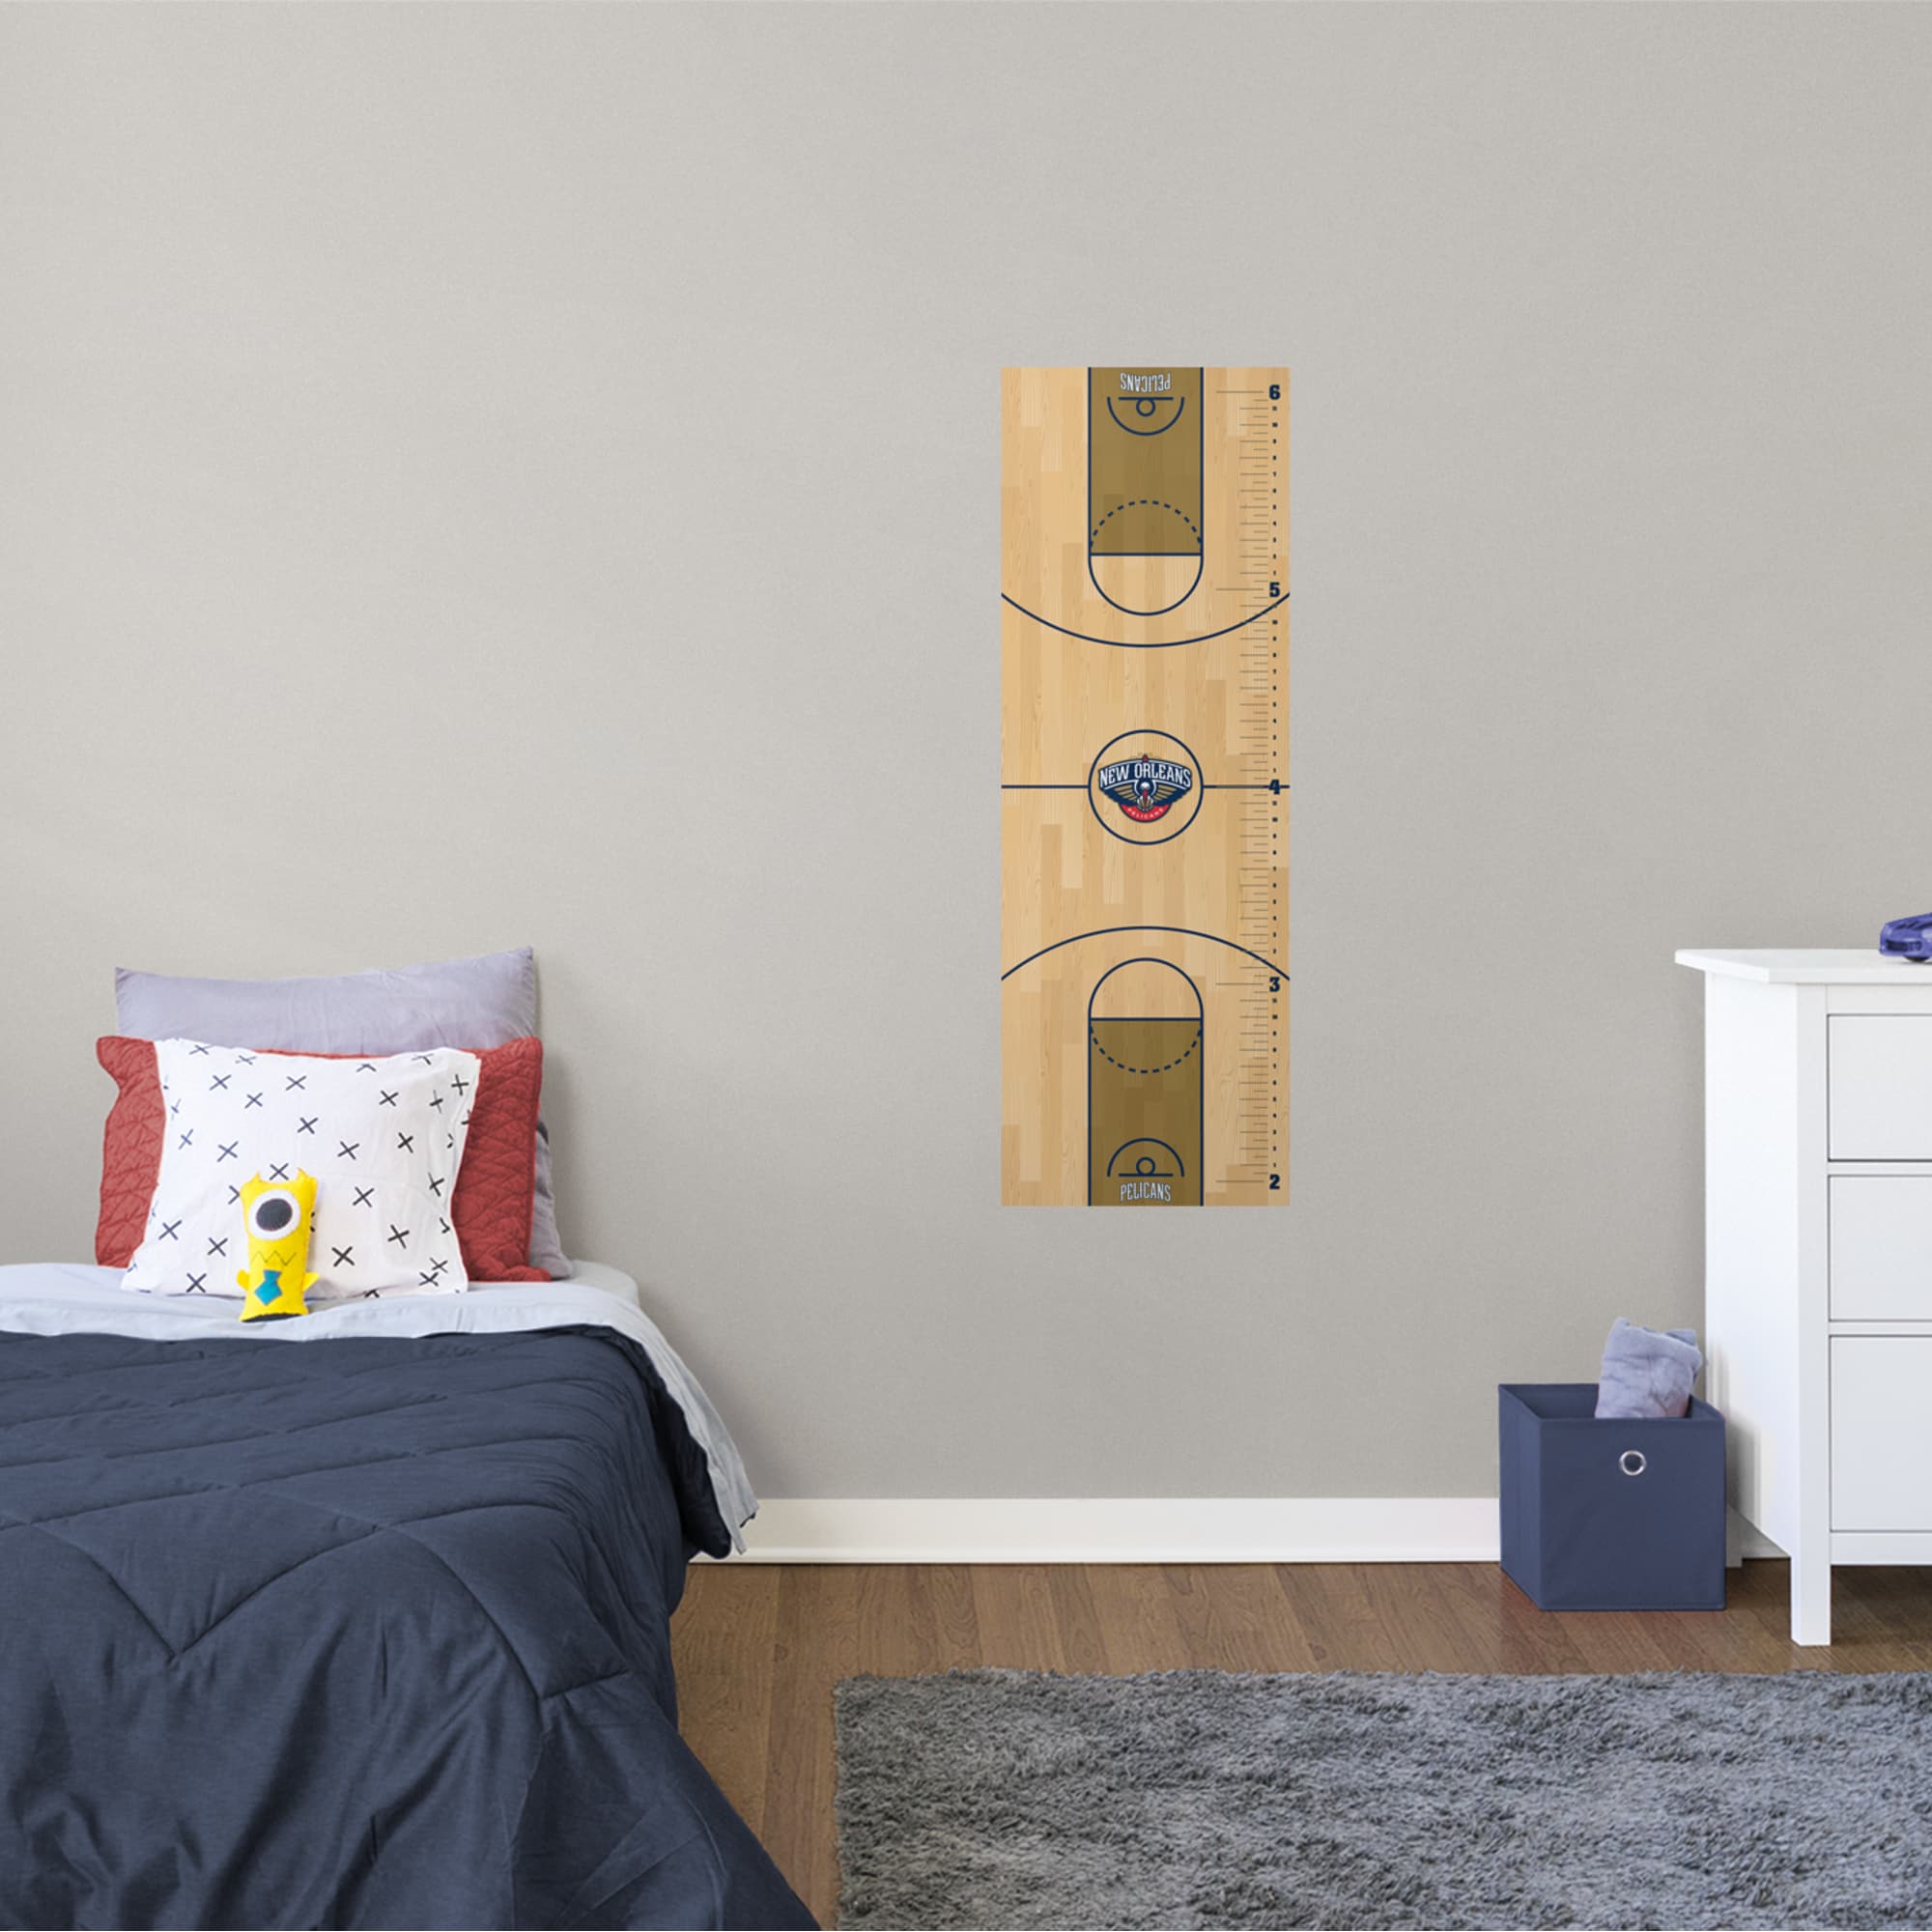 New Orleans Pelicans: Growth Chart - Officially Licensed NBA Removable Wall Decal 17.5"W x 51.0"H by Fathead | Vinyl